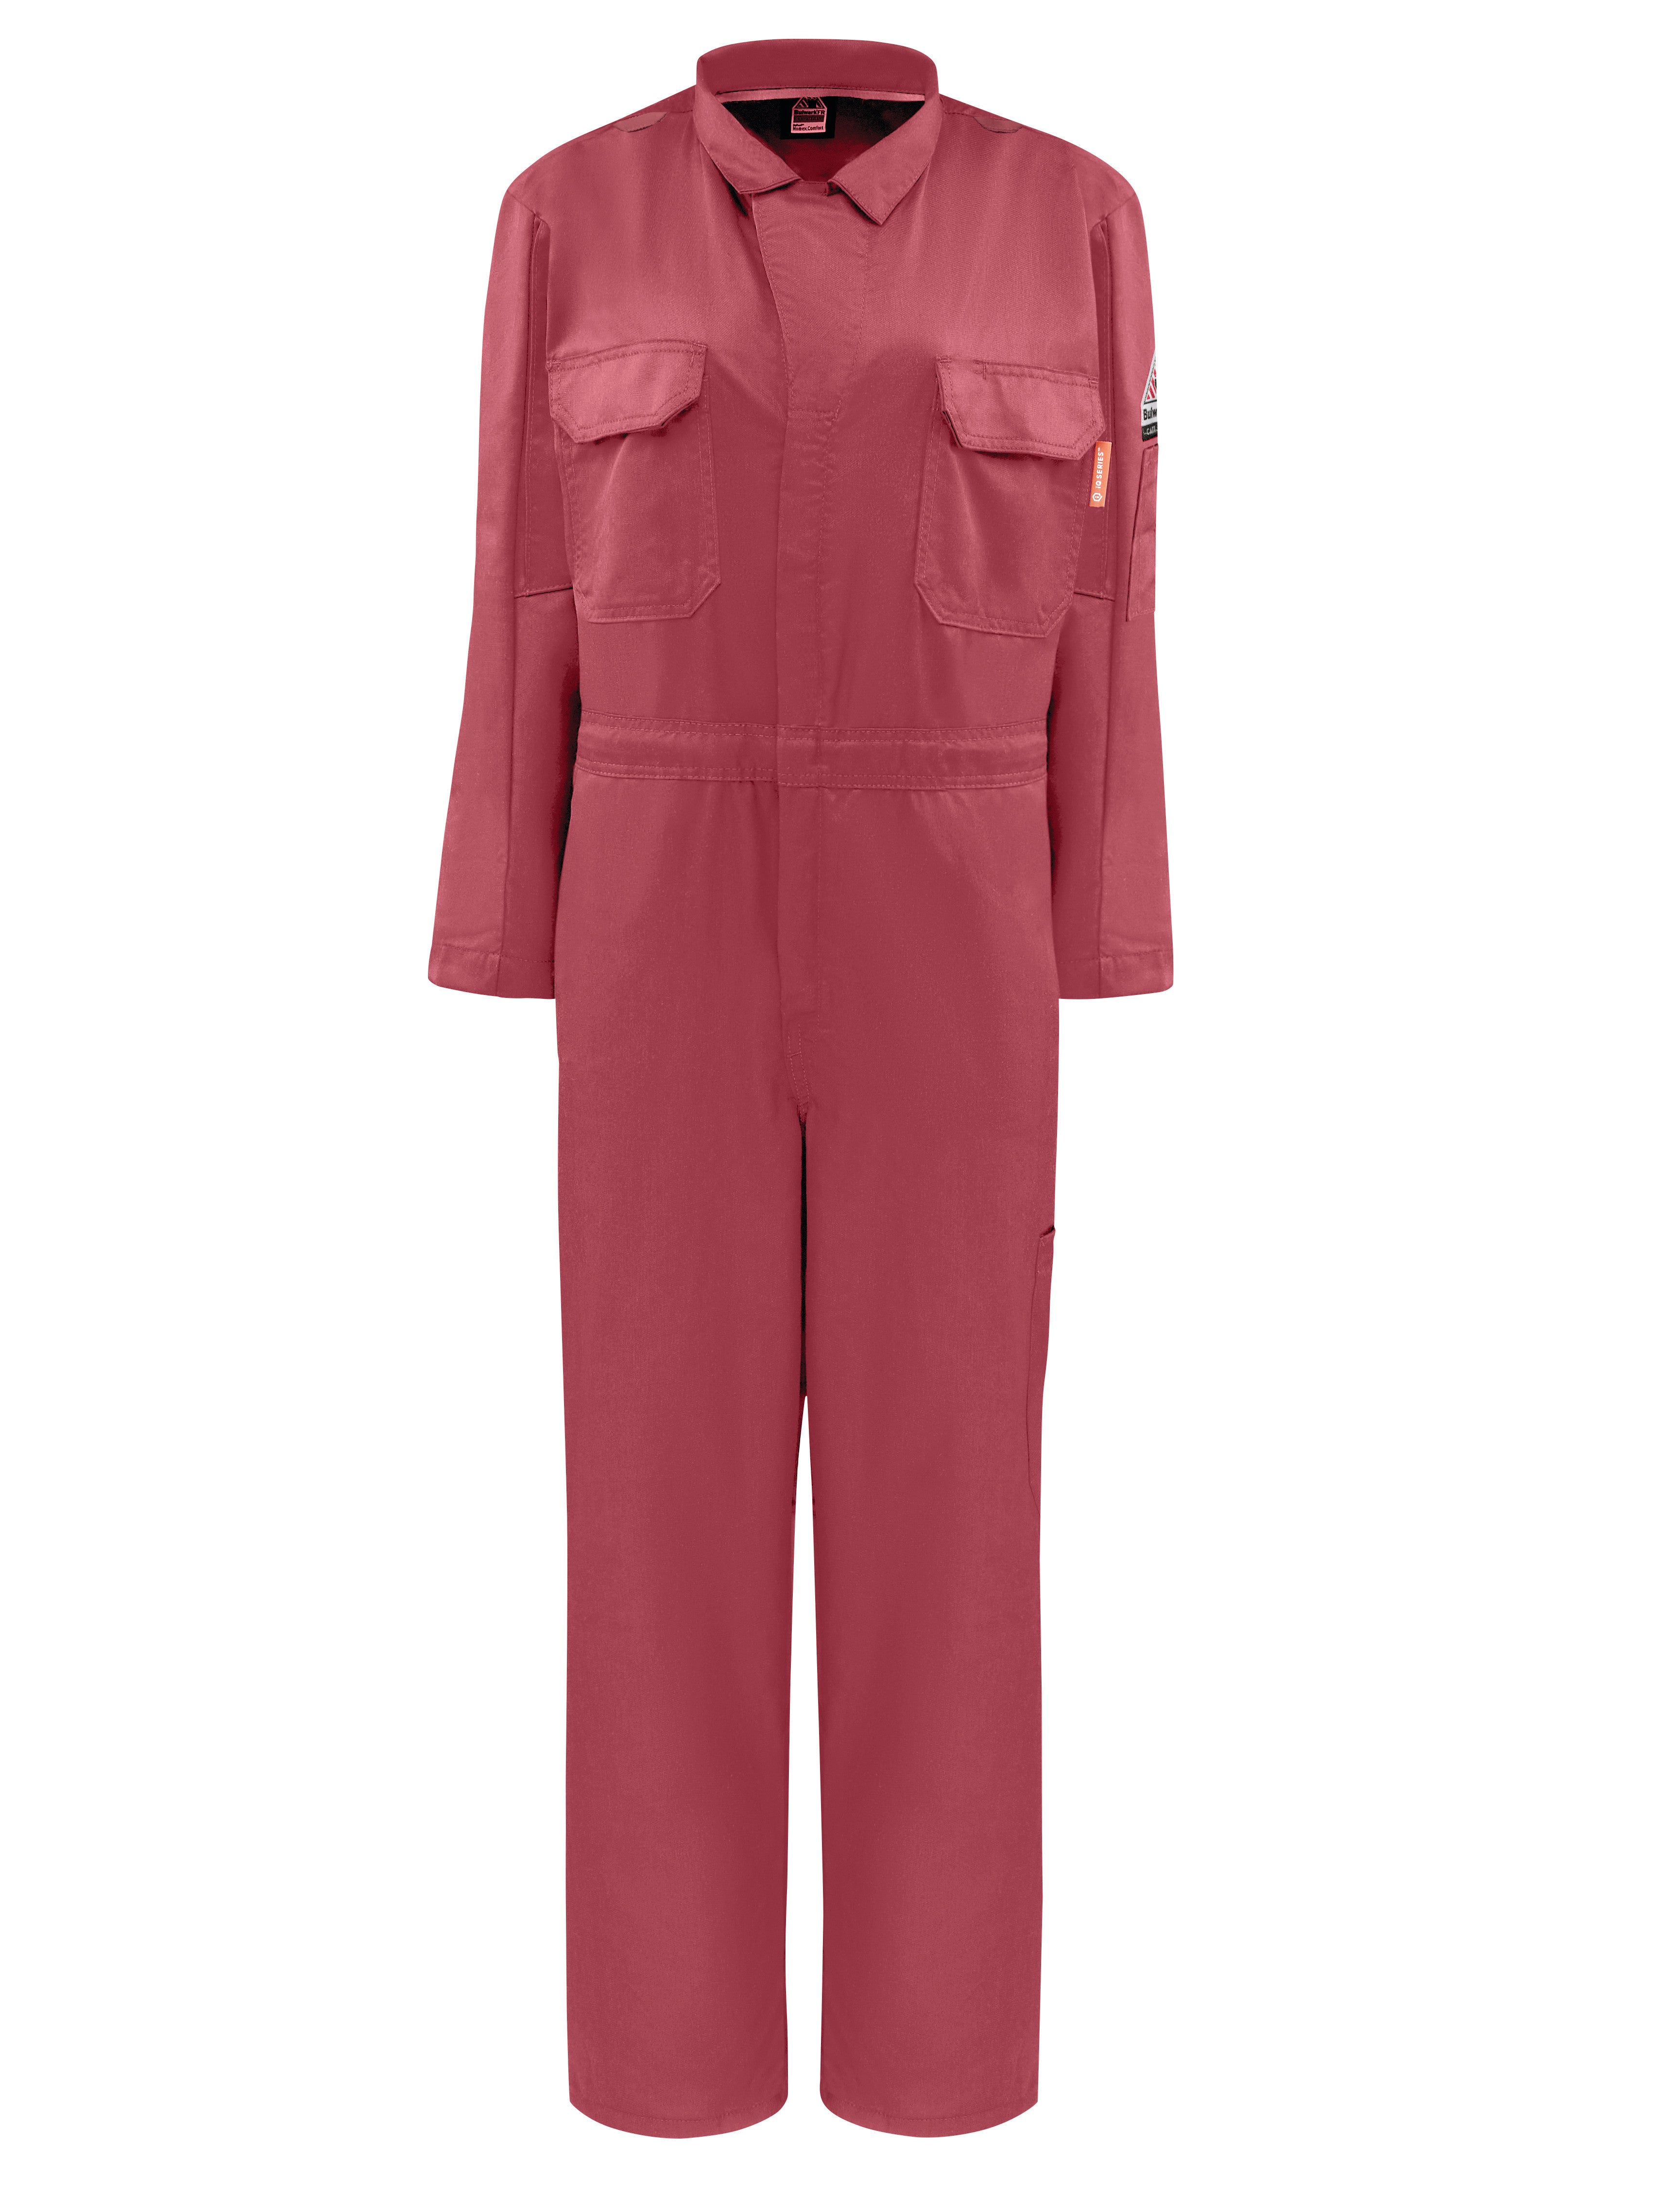 Coverall - UnInsulated QC23 - Red